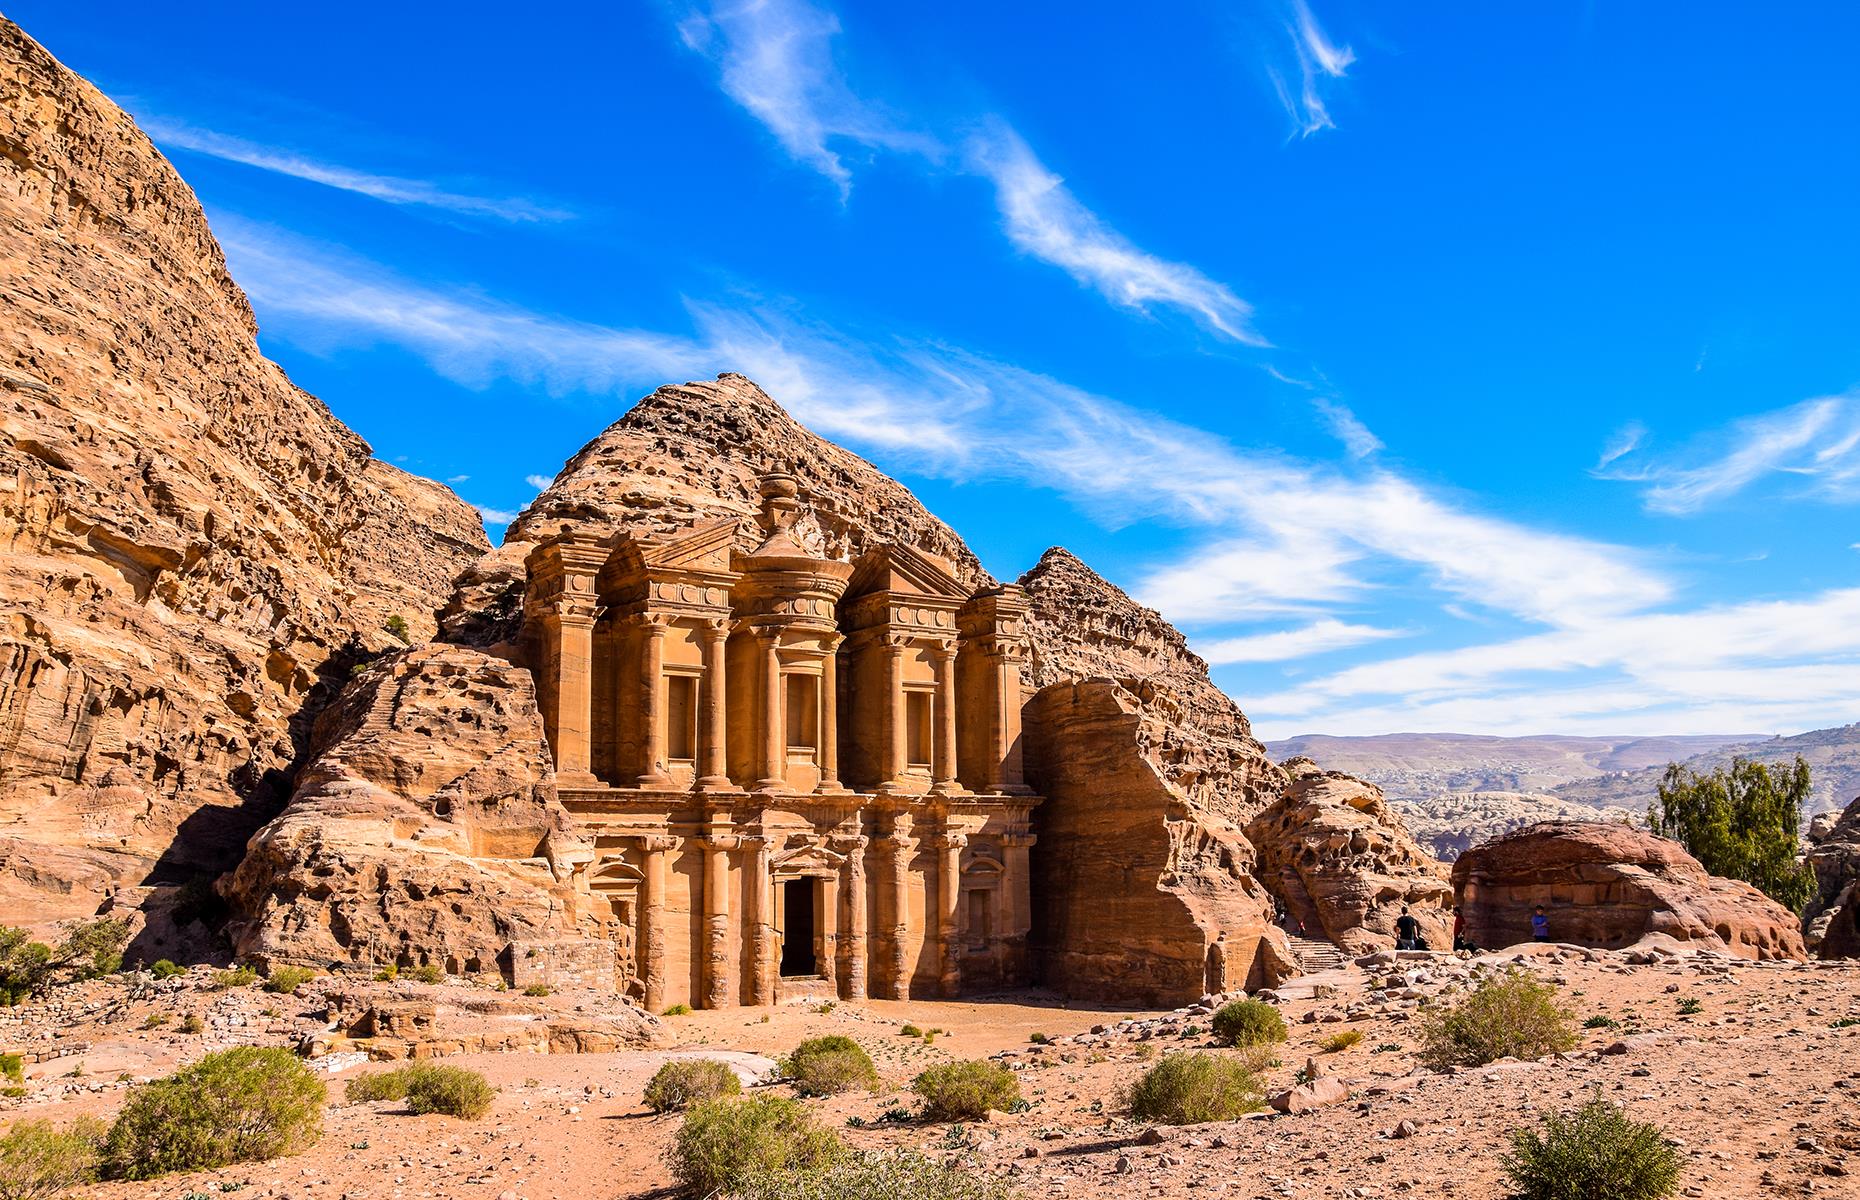 <p>With its incredible architecture carved out of pinkish rock, Petra in Jordan is also known as the Rose City. It's thought to have been established as early as 312 BC and today you can wander between its ancient temples, tombs and theaters, which have been a UNESCO World Heritage Site since 1985.</p>  <p><strong><a href="https://www.loveexploring.com/galleries/174286/amazing-archaeological-finds-discovered-by-amateurs?page=1">Discover some amazing archaeological finds stumbled upon by amateurs</a></strong></p>